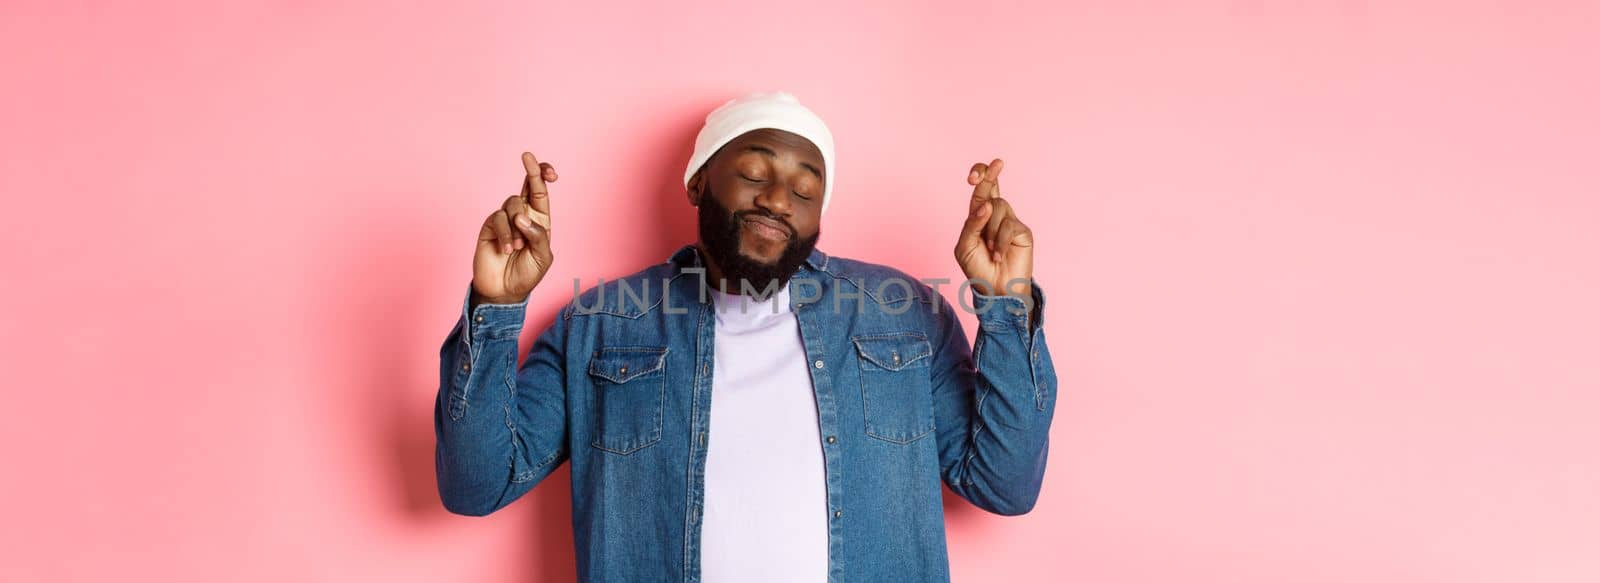 Hopeful and dreamy Black man making wish, cross fingers and smiling, standing over pink background.